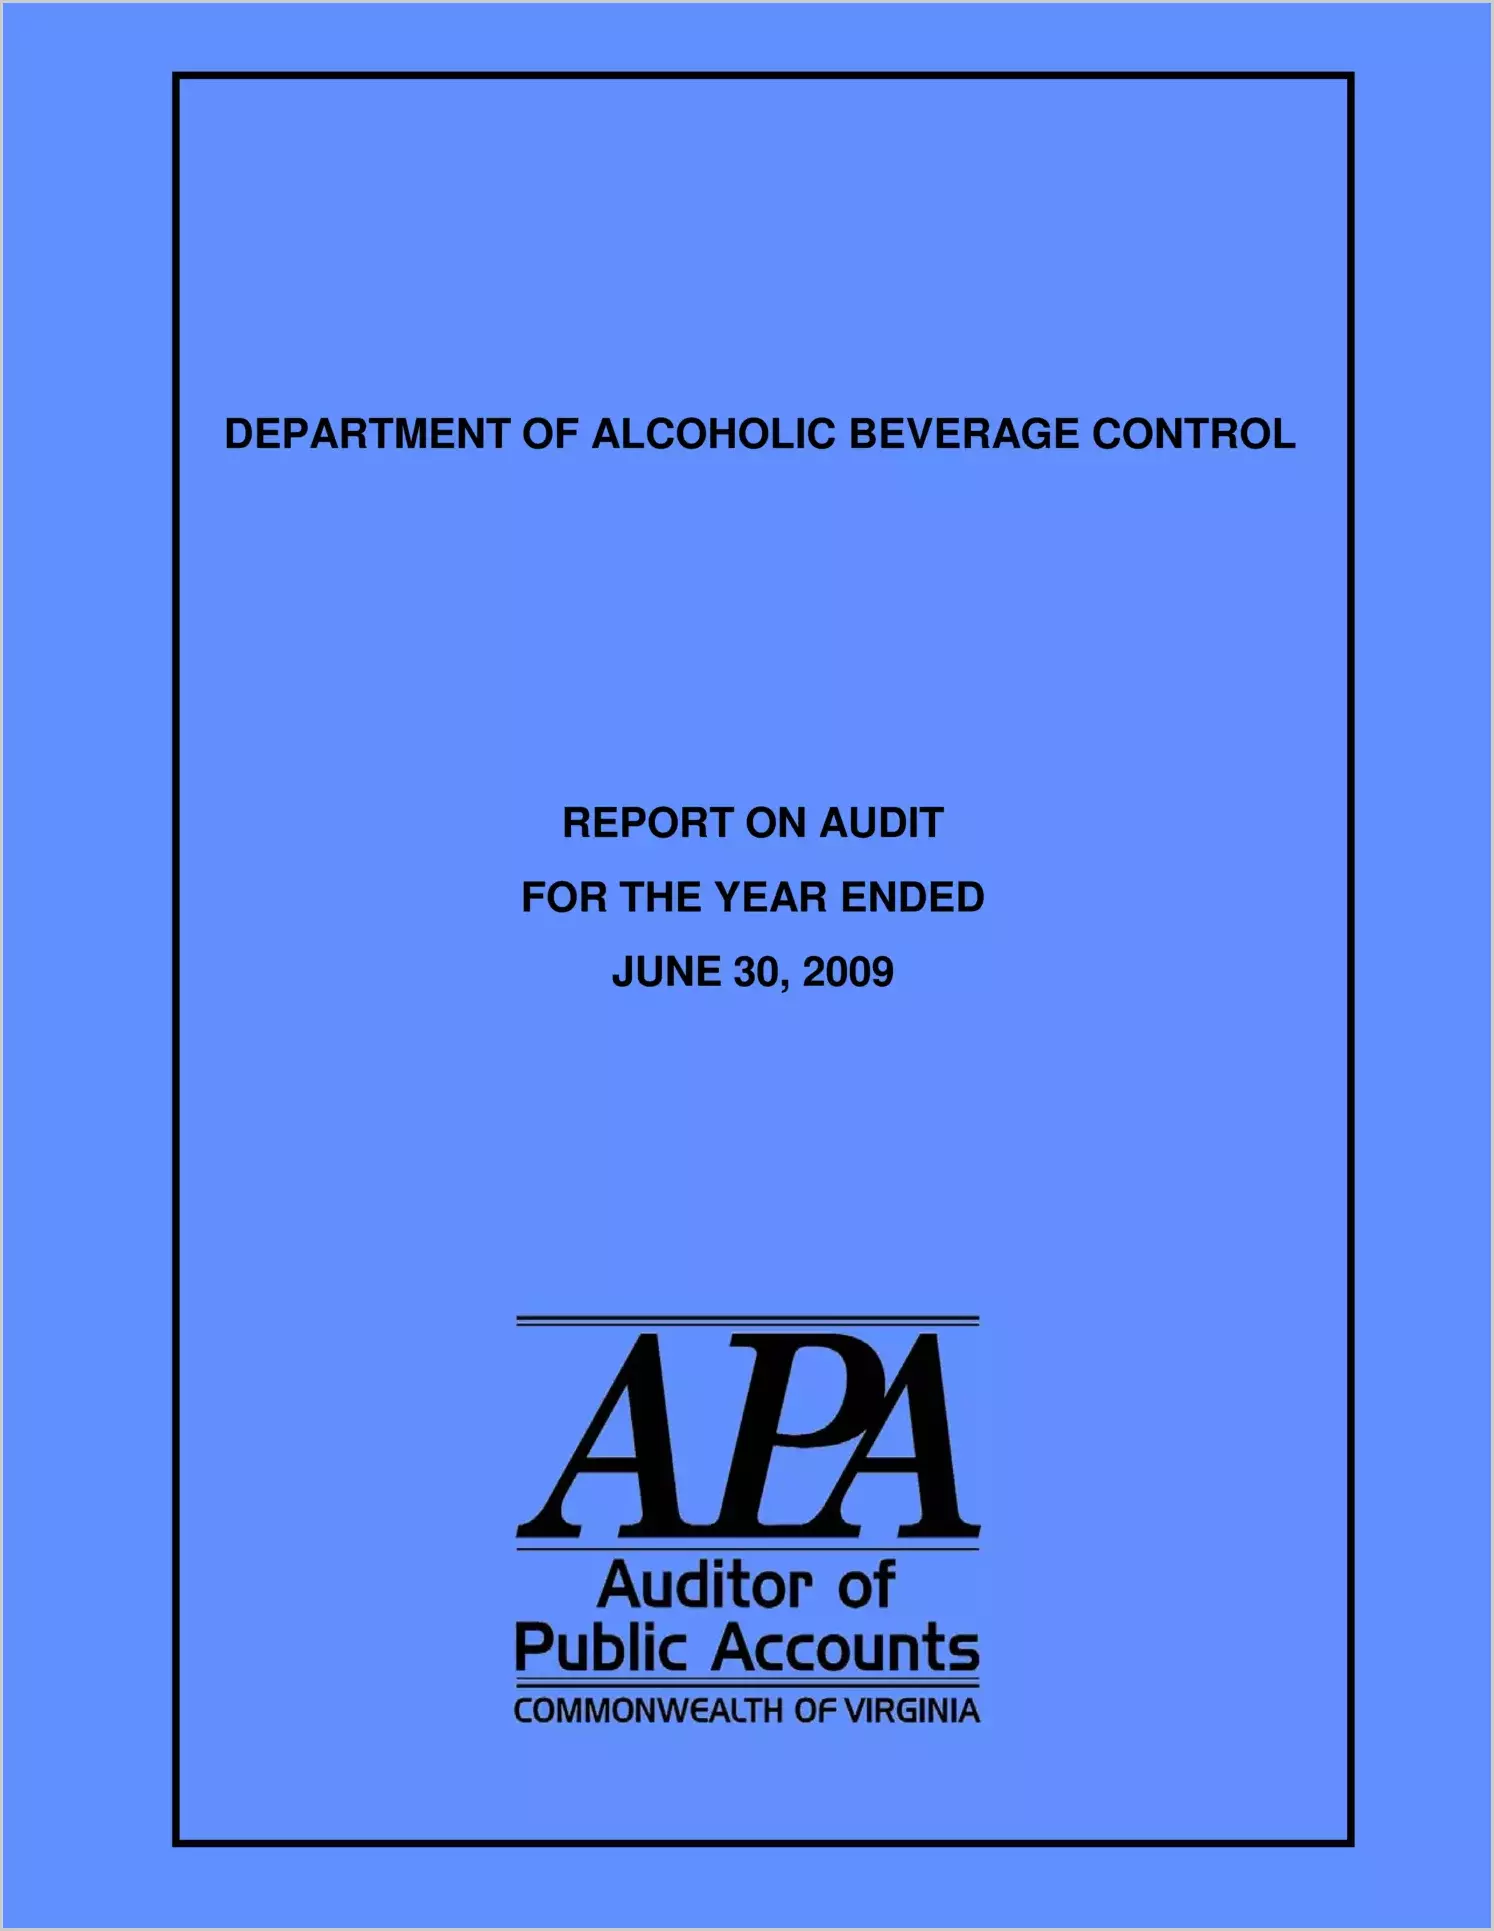 Department of Alcoholic Beverage Control as of and for the year then ended June 30, 2009